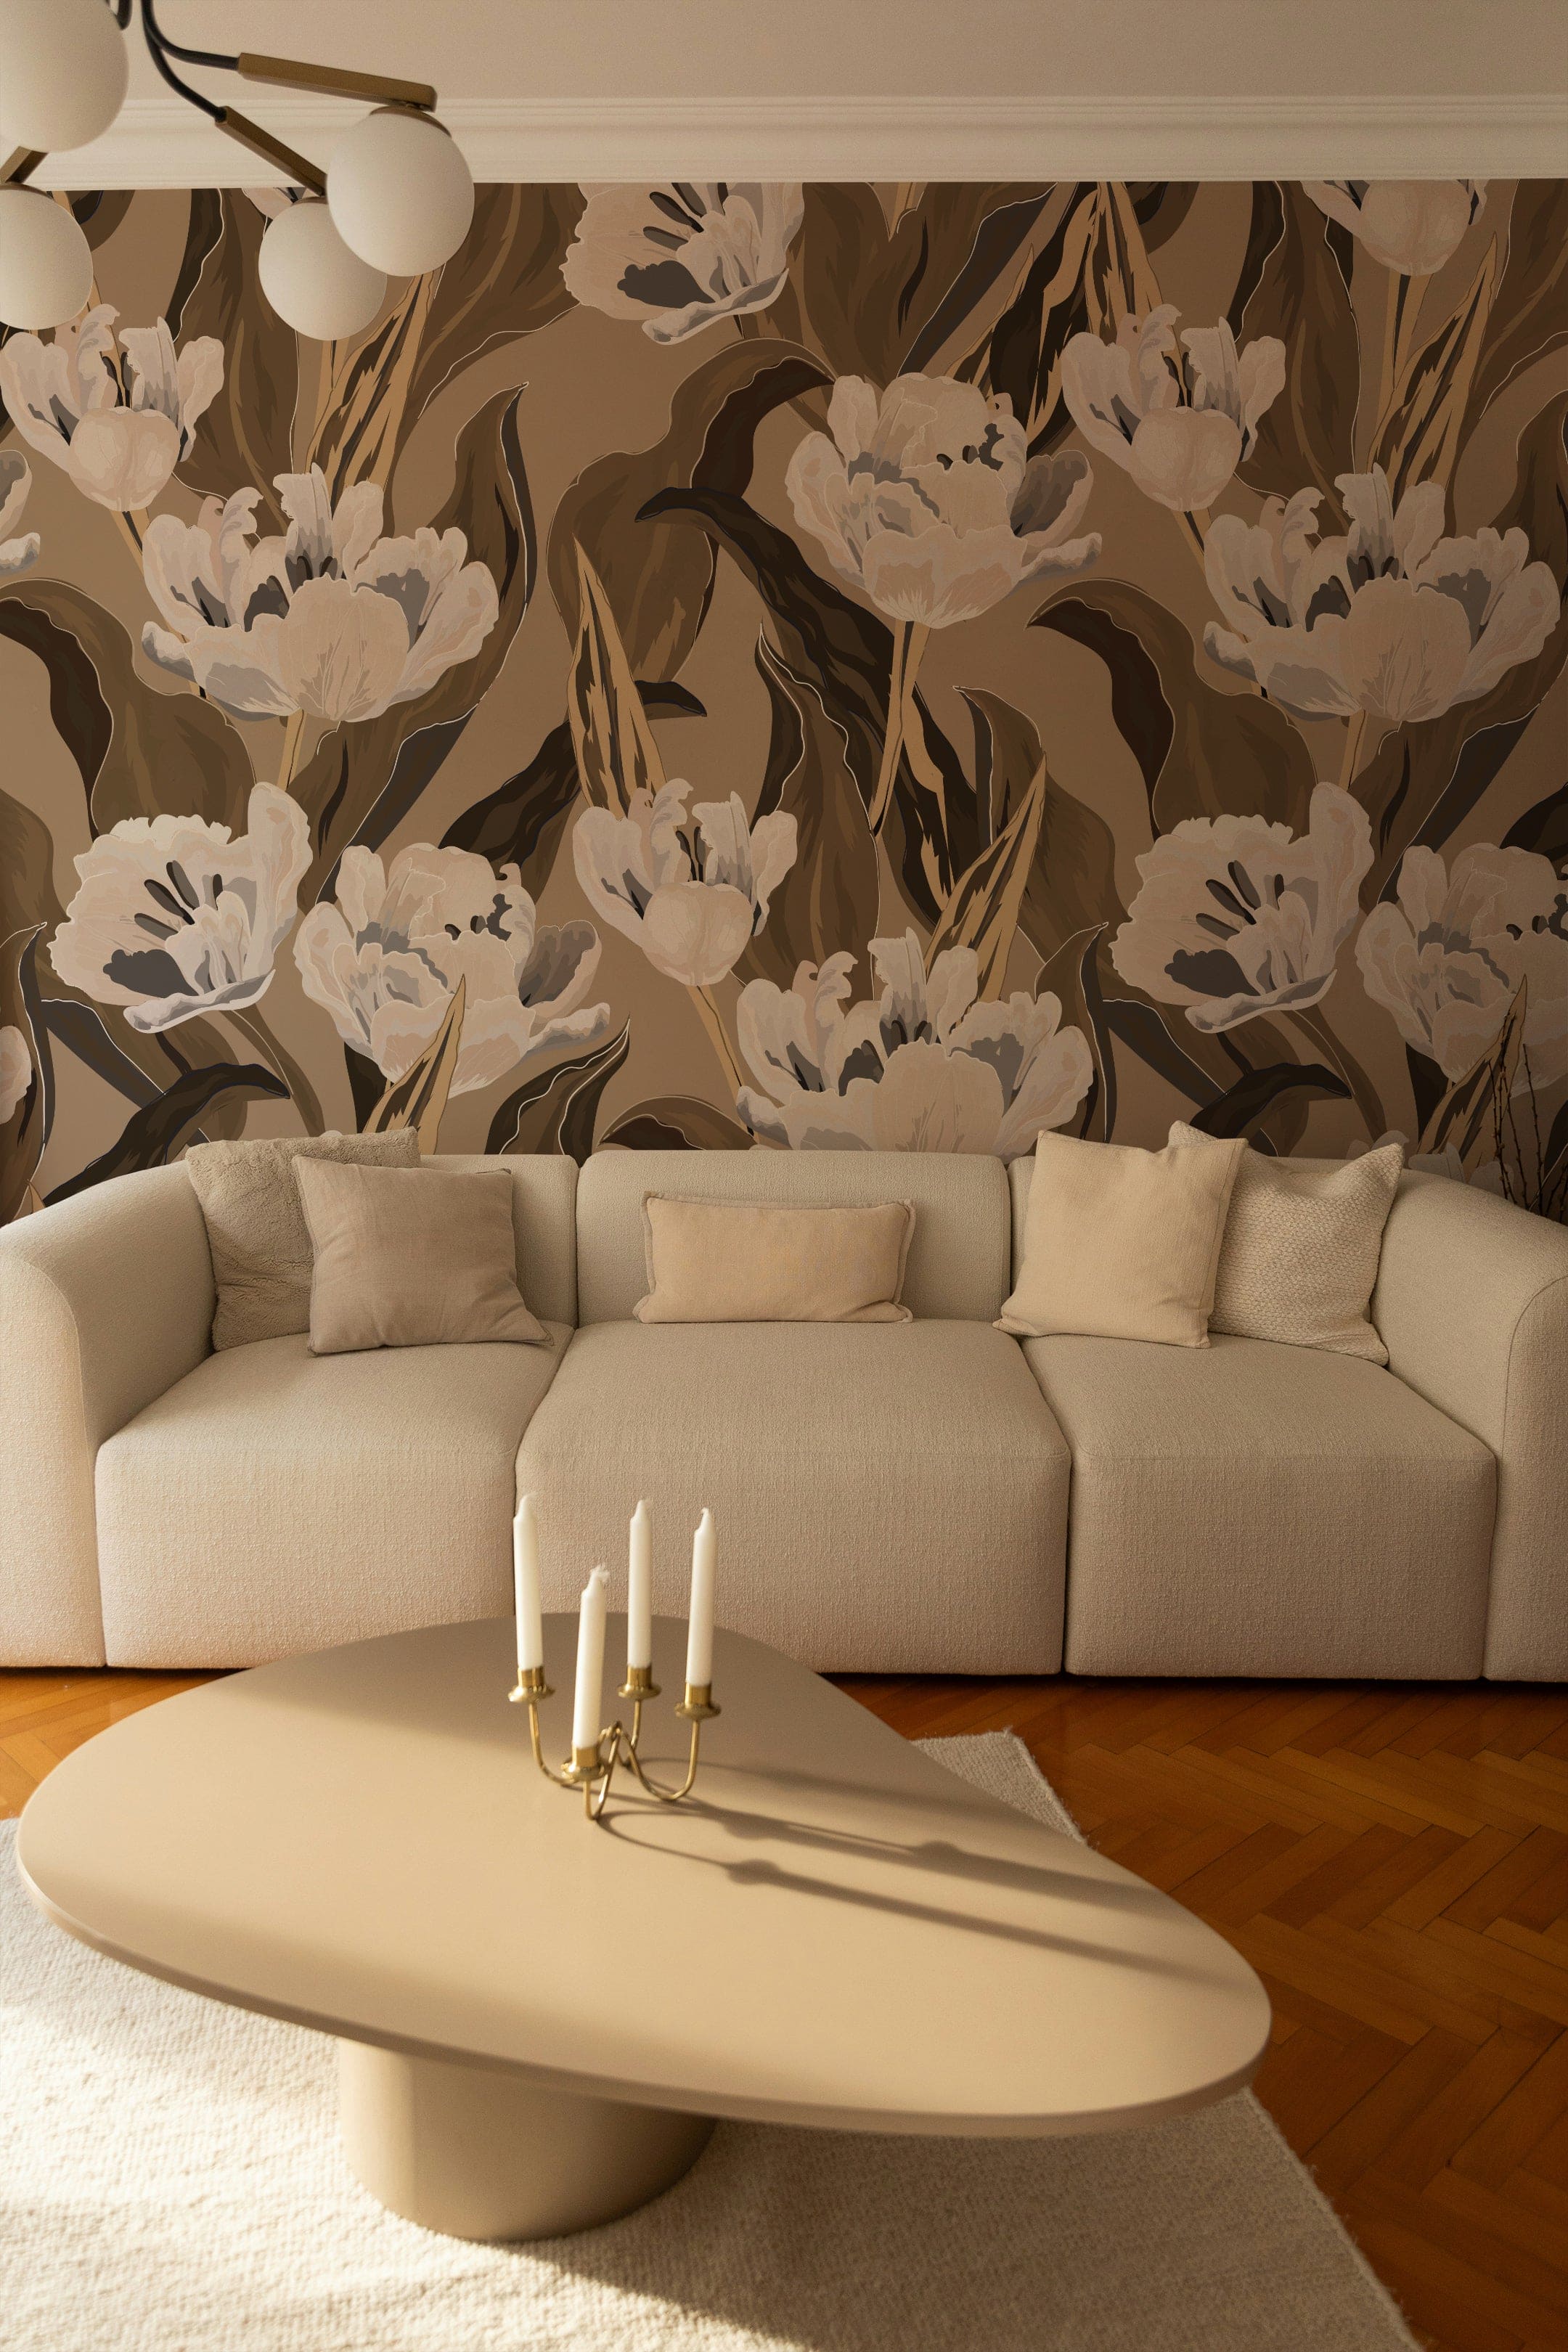 A contemporary living room showcasing the Blooming Tulips Wallpaper on a feature wall. The wallpaper, with its large white and gray tulips on a taupe background, complements the neutral-toned sofa and modern coffee table, enhancing the space with a sophisticated botanical theme.